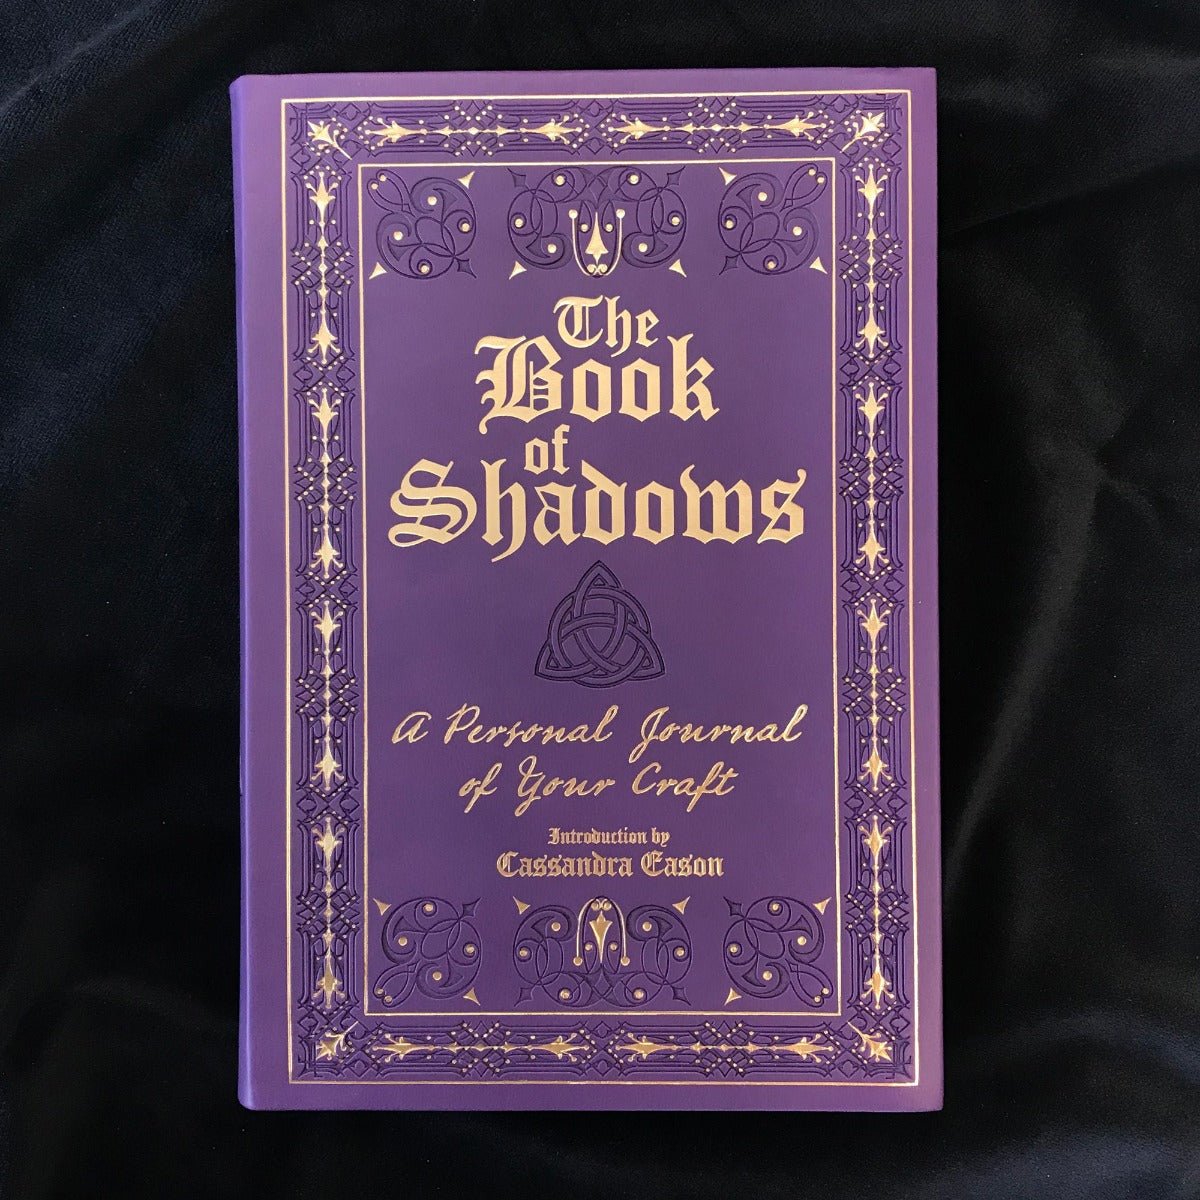 Book of Shadows Junk Journal Pages & Ephemera: 21 Sheets of Decorative Paper/Printed One-Sided/Vintage Moon, Goddess, Botanical, Tarot, Fairies, Gothic Ravens & Black Cat Designs/Perfect Magical Gift [Book]